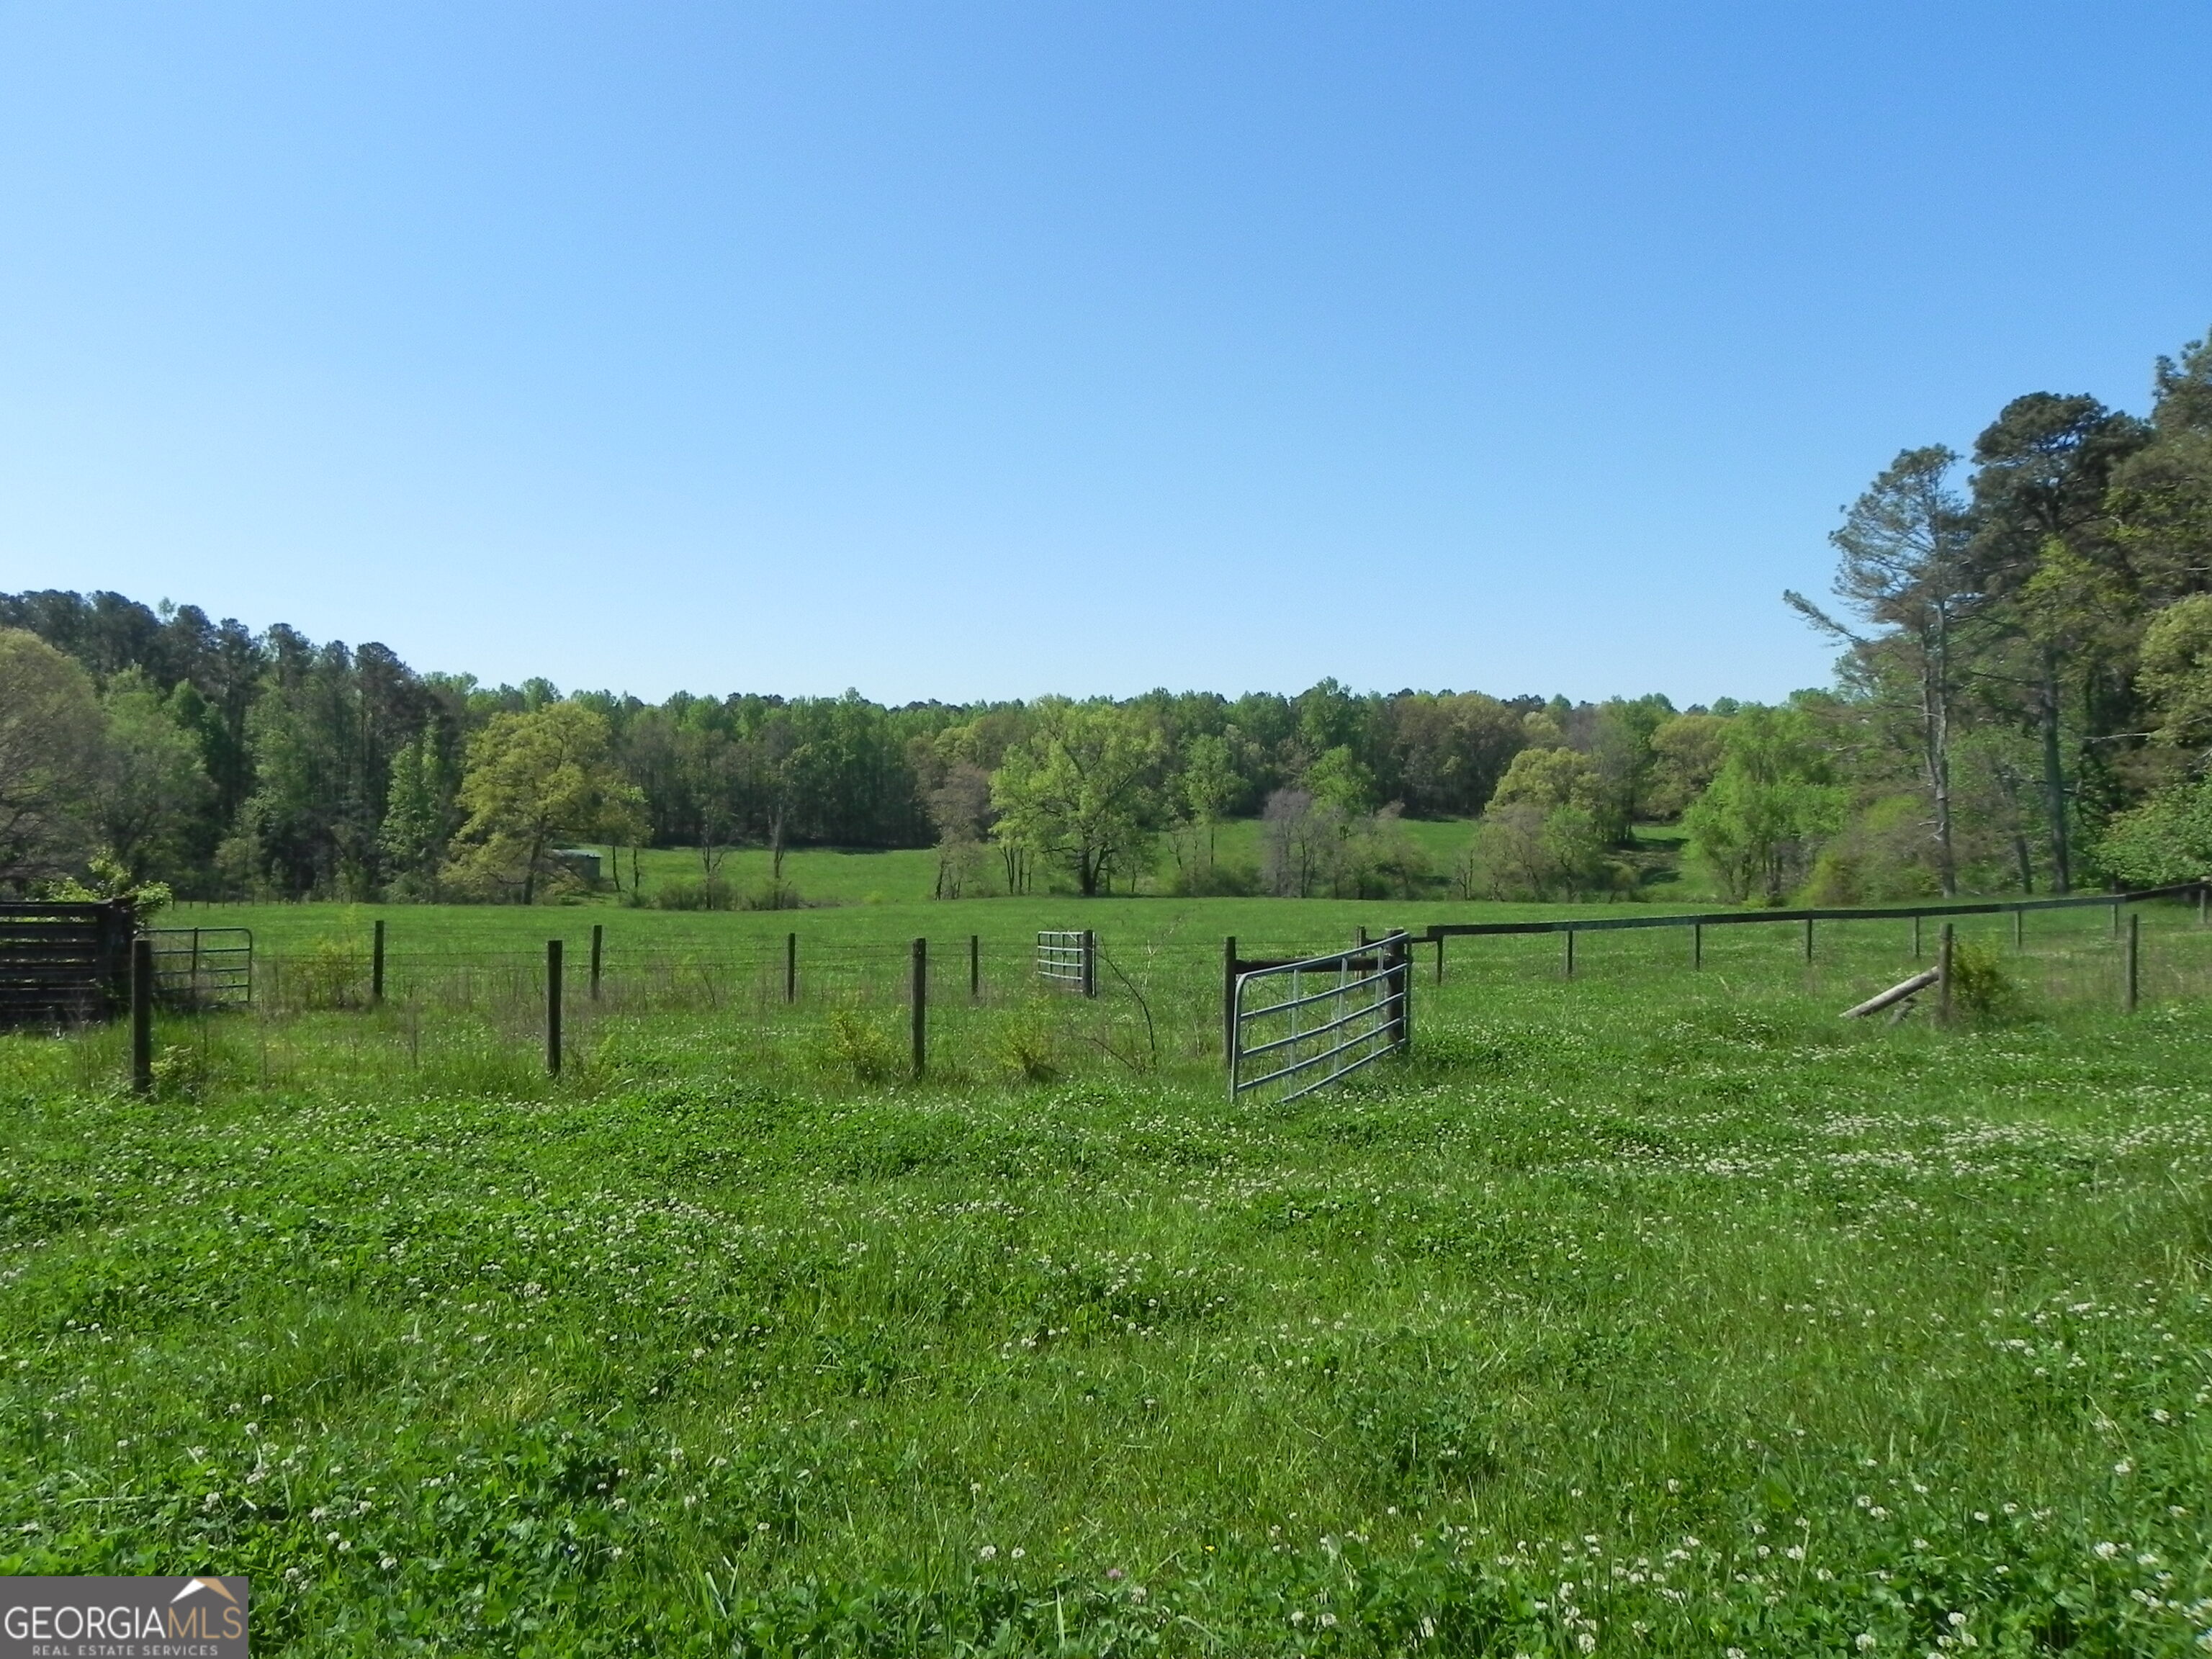 a view of a green field with wooden fence